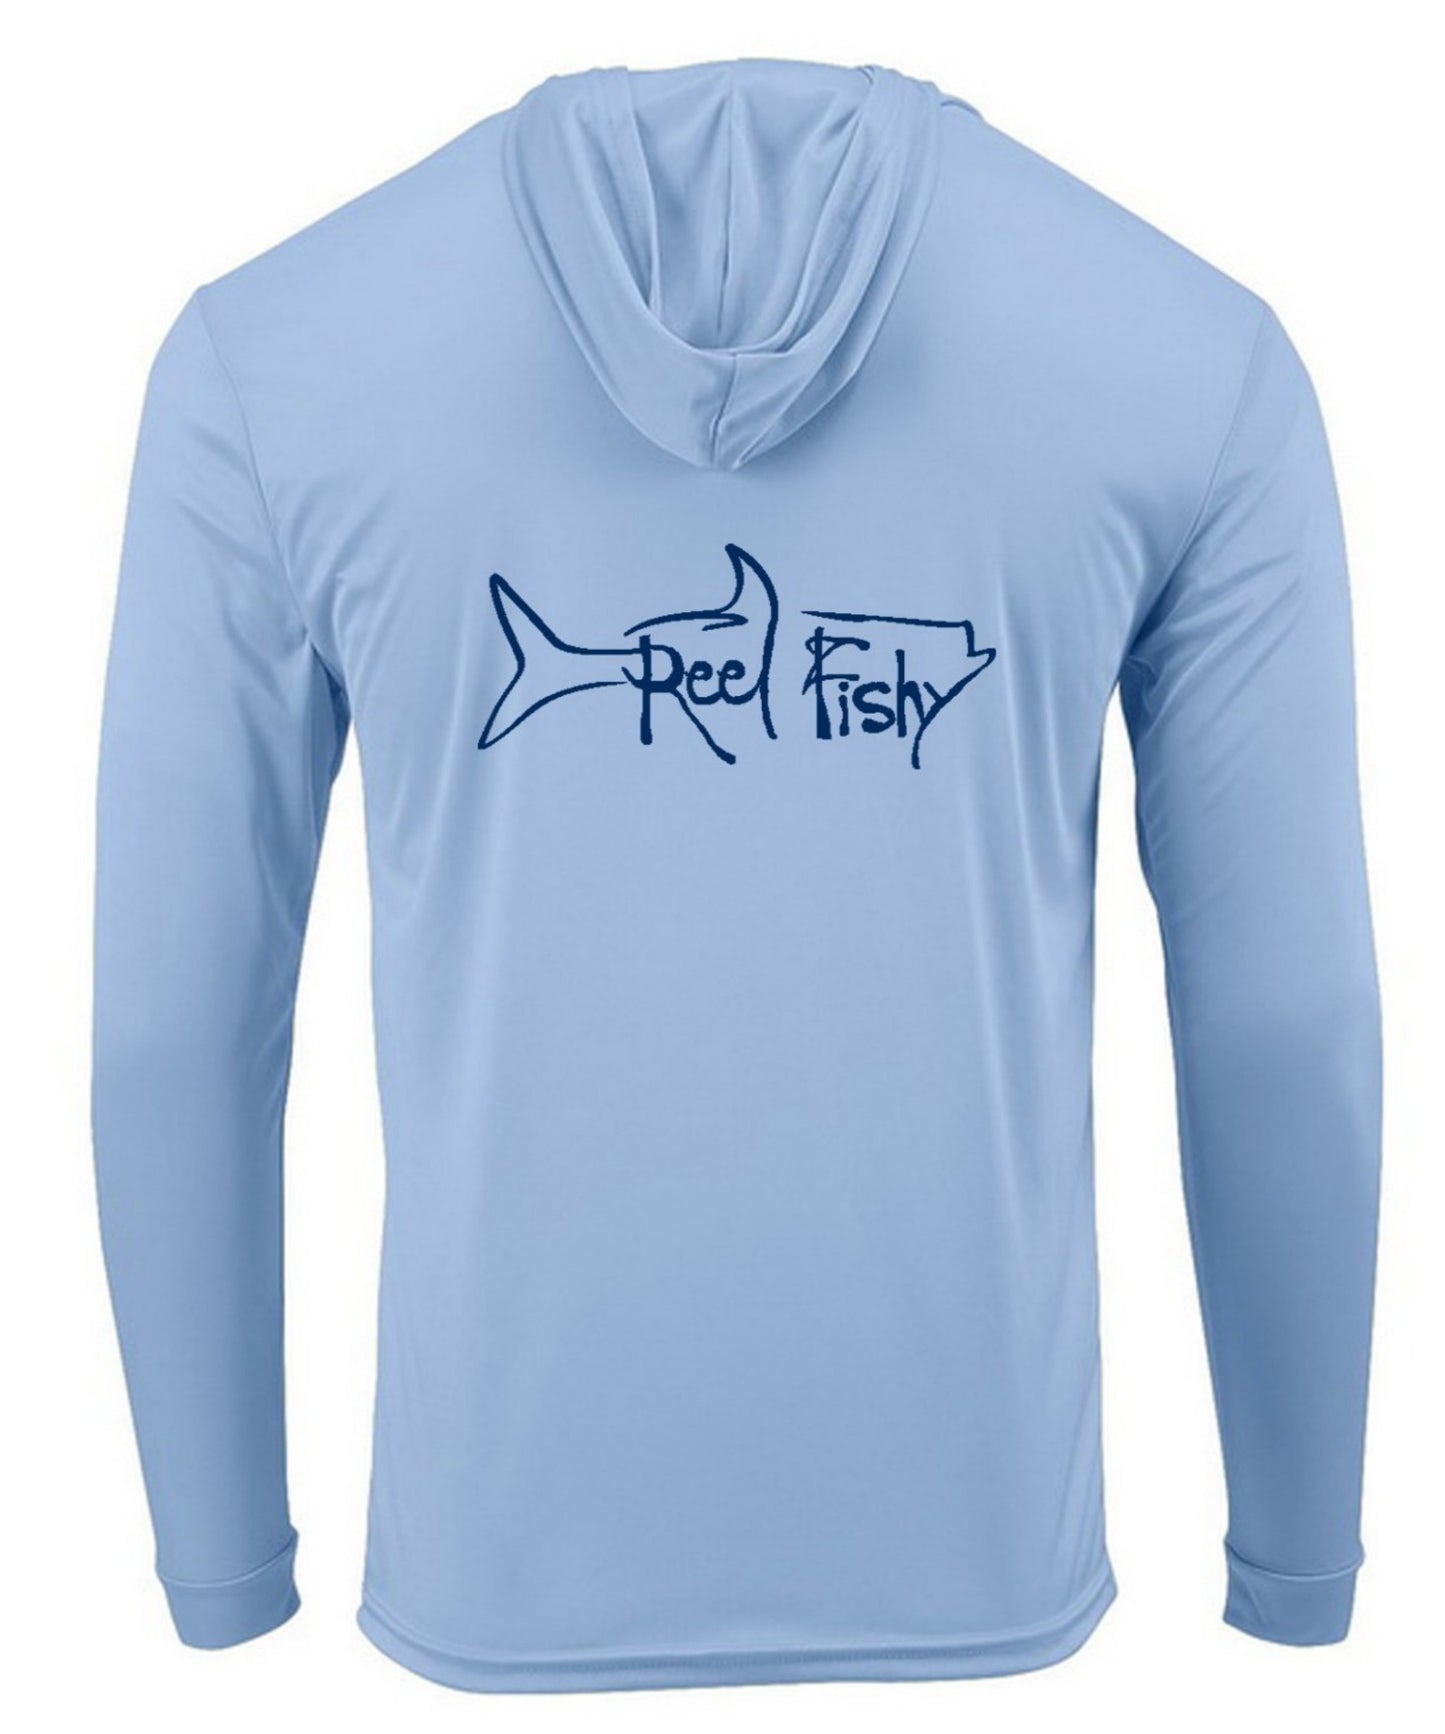 Native Angler performance fishing hoodies will help keep you protected from  the Sun on a hot sunny day. Nativeanglerapparel.com #fishing